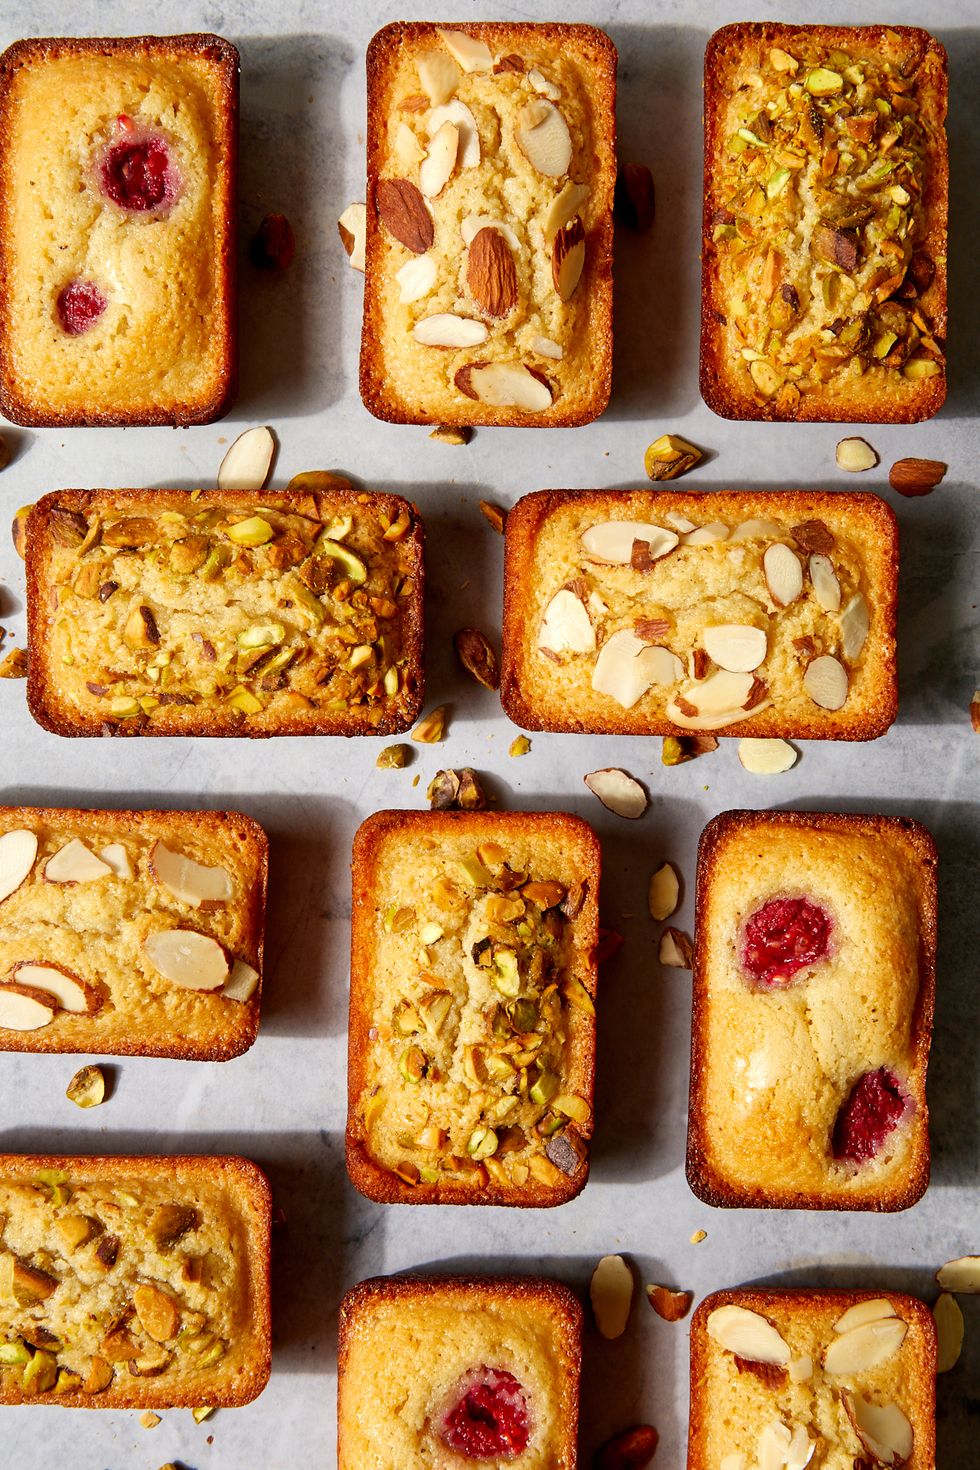 a group of financiers topped with different ingredients like raspberries, pistachios, and sliced almonds